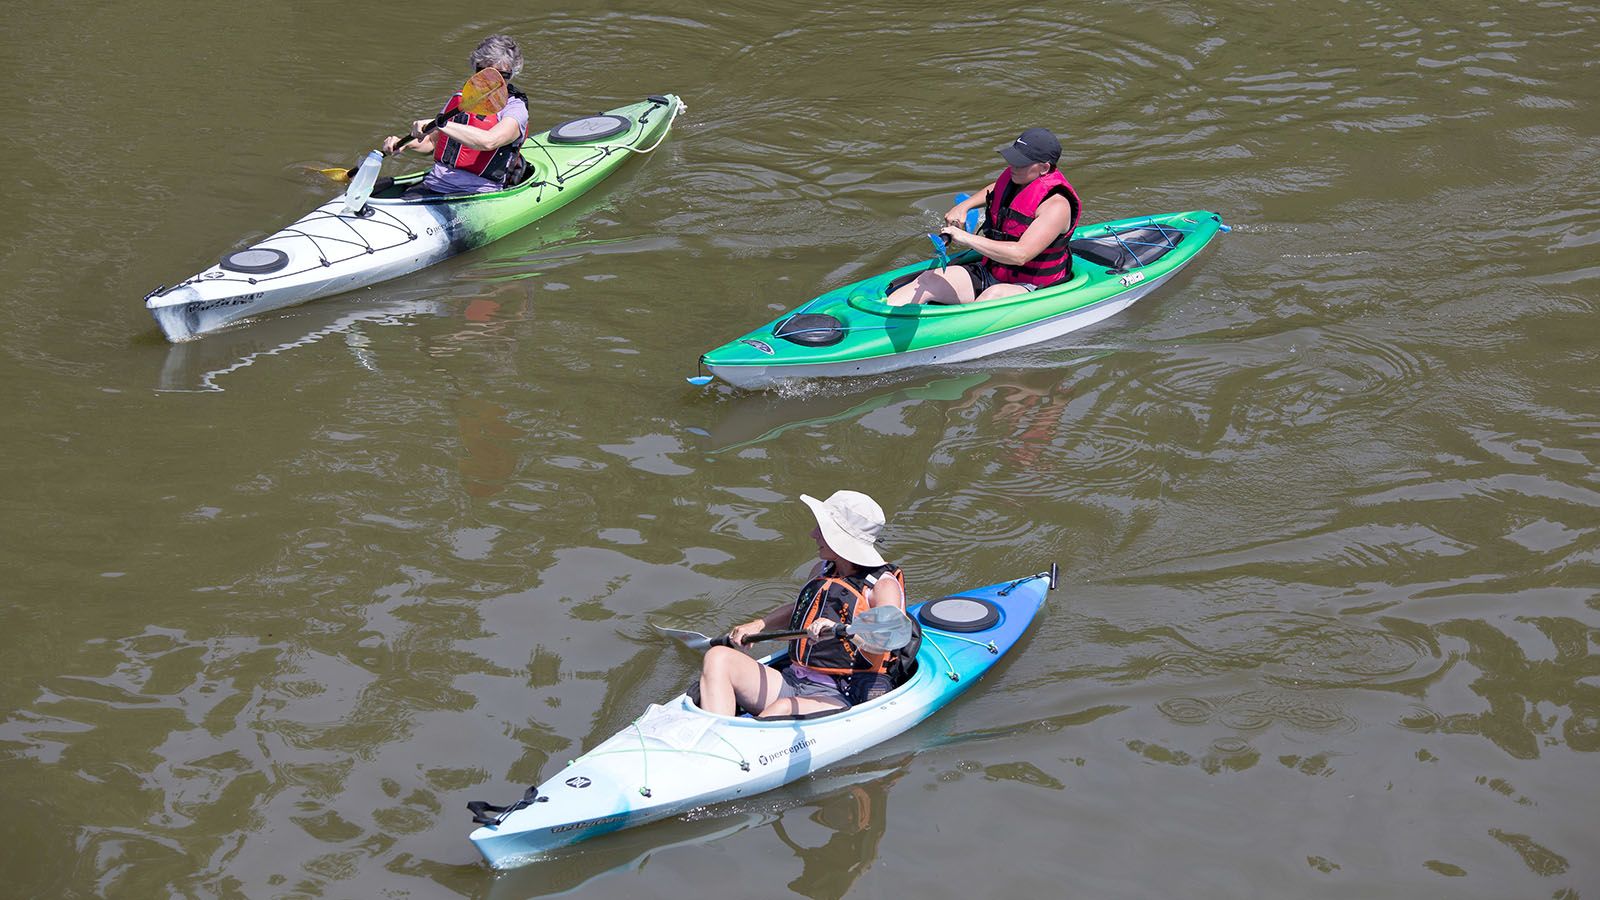 Patrons will embark on a scavenger hunt during Pedal, Paddle, Play on Saturday, June 24, at Promenade Park.